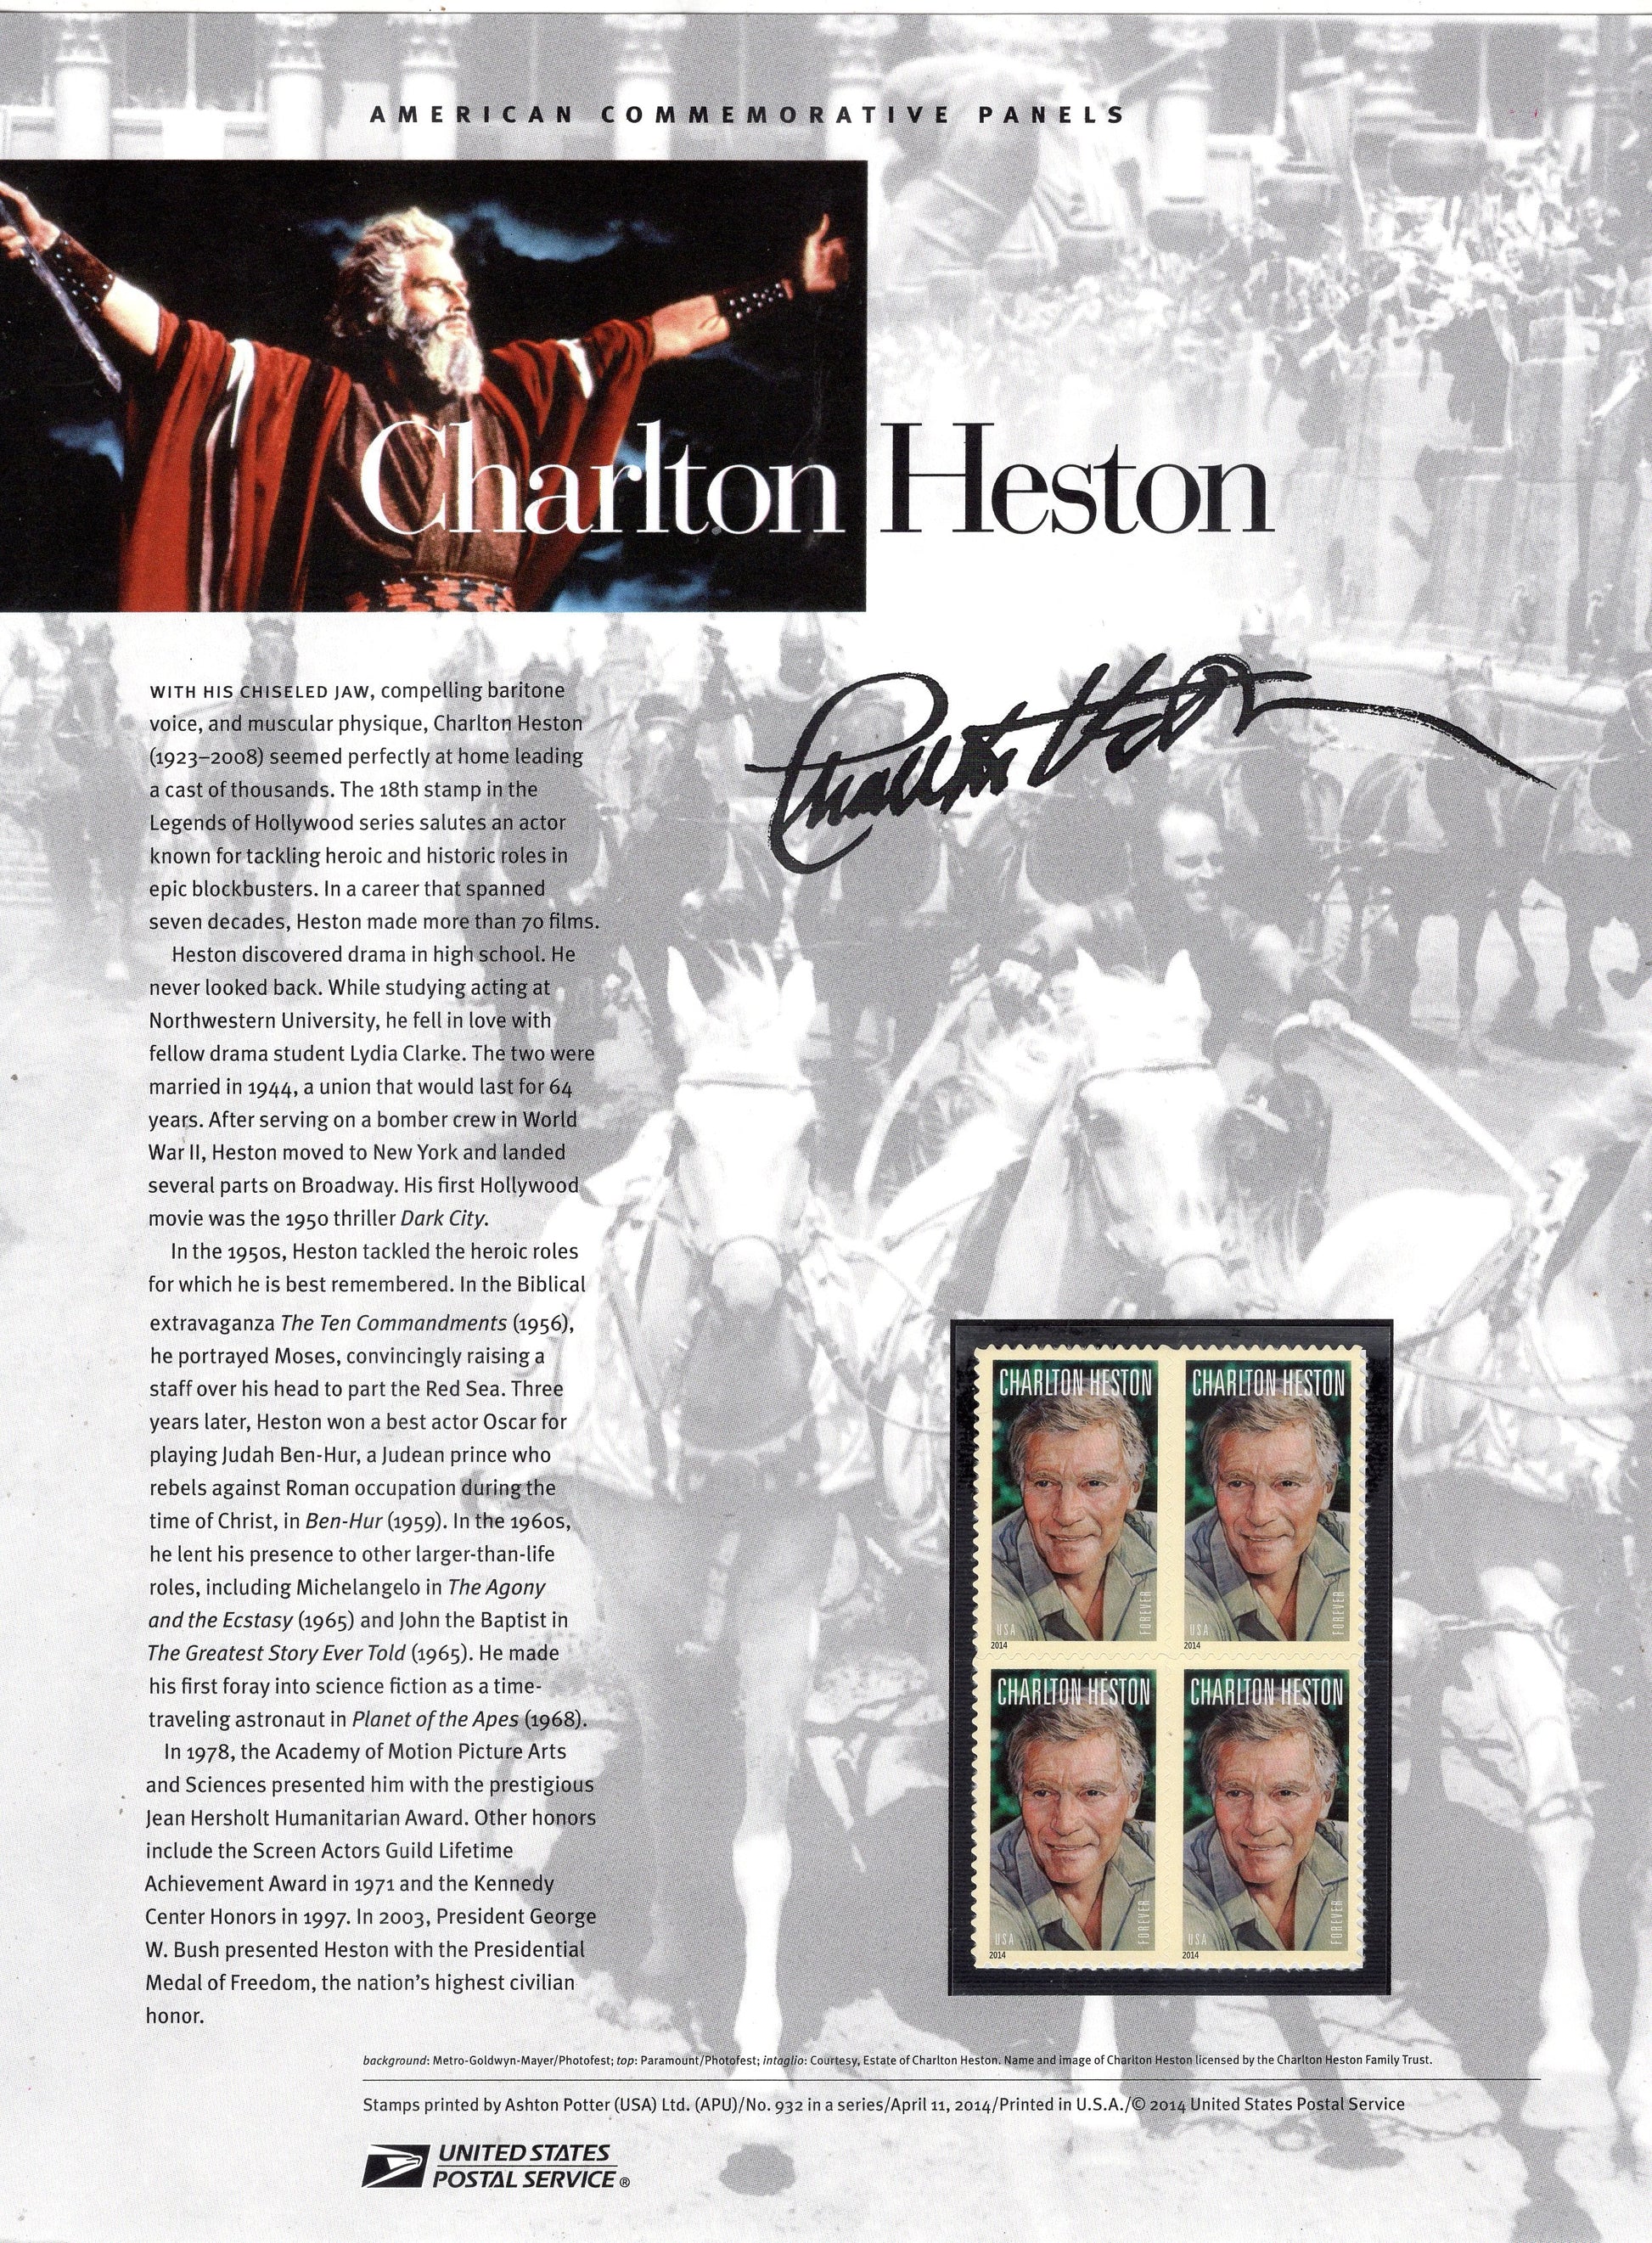 CHARLTON HESTON - LEGENDARY ACTOR - The Ten Commandments - Ben-Hur - Commemorative Panel with 4 Stamps, Illustrations and Text - Makes a Great Gift - measures about 8.5x11 - Issued 2014